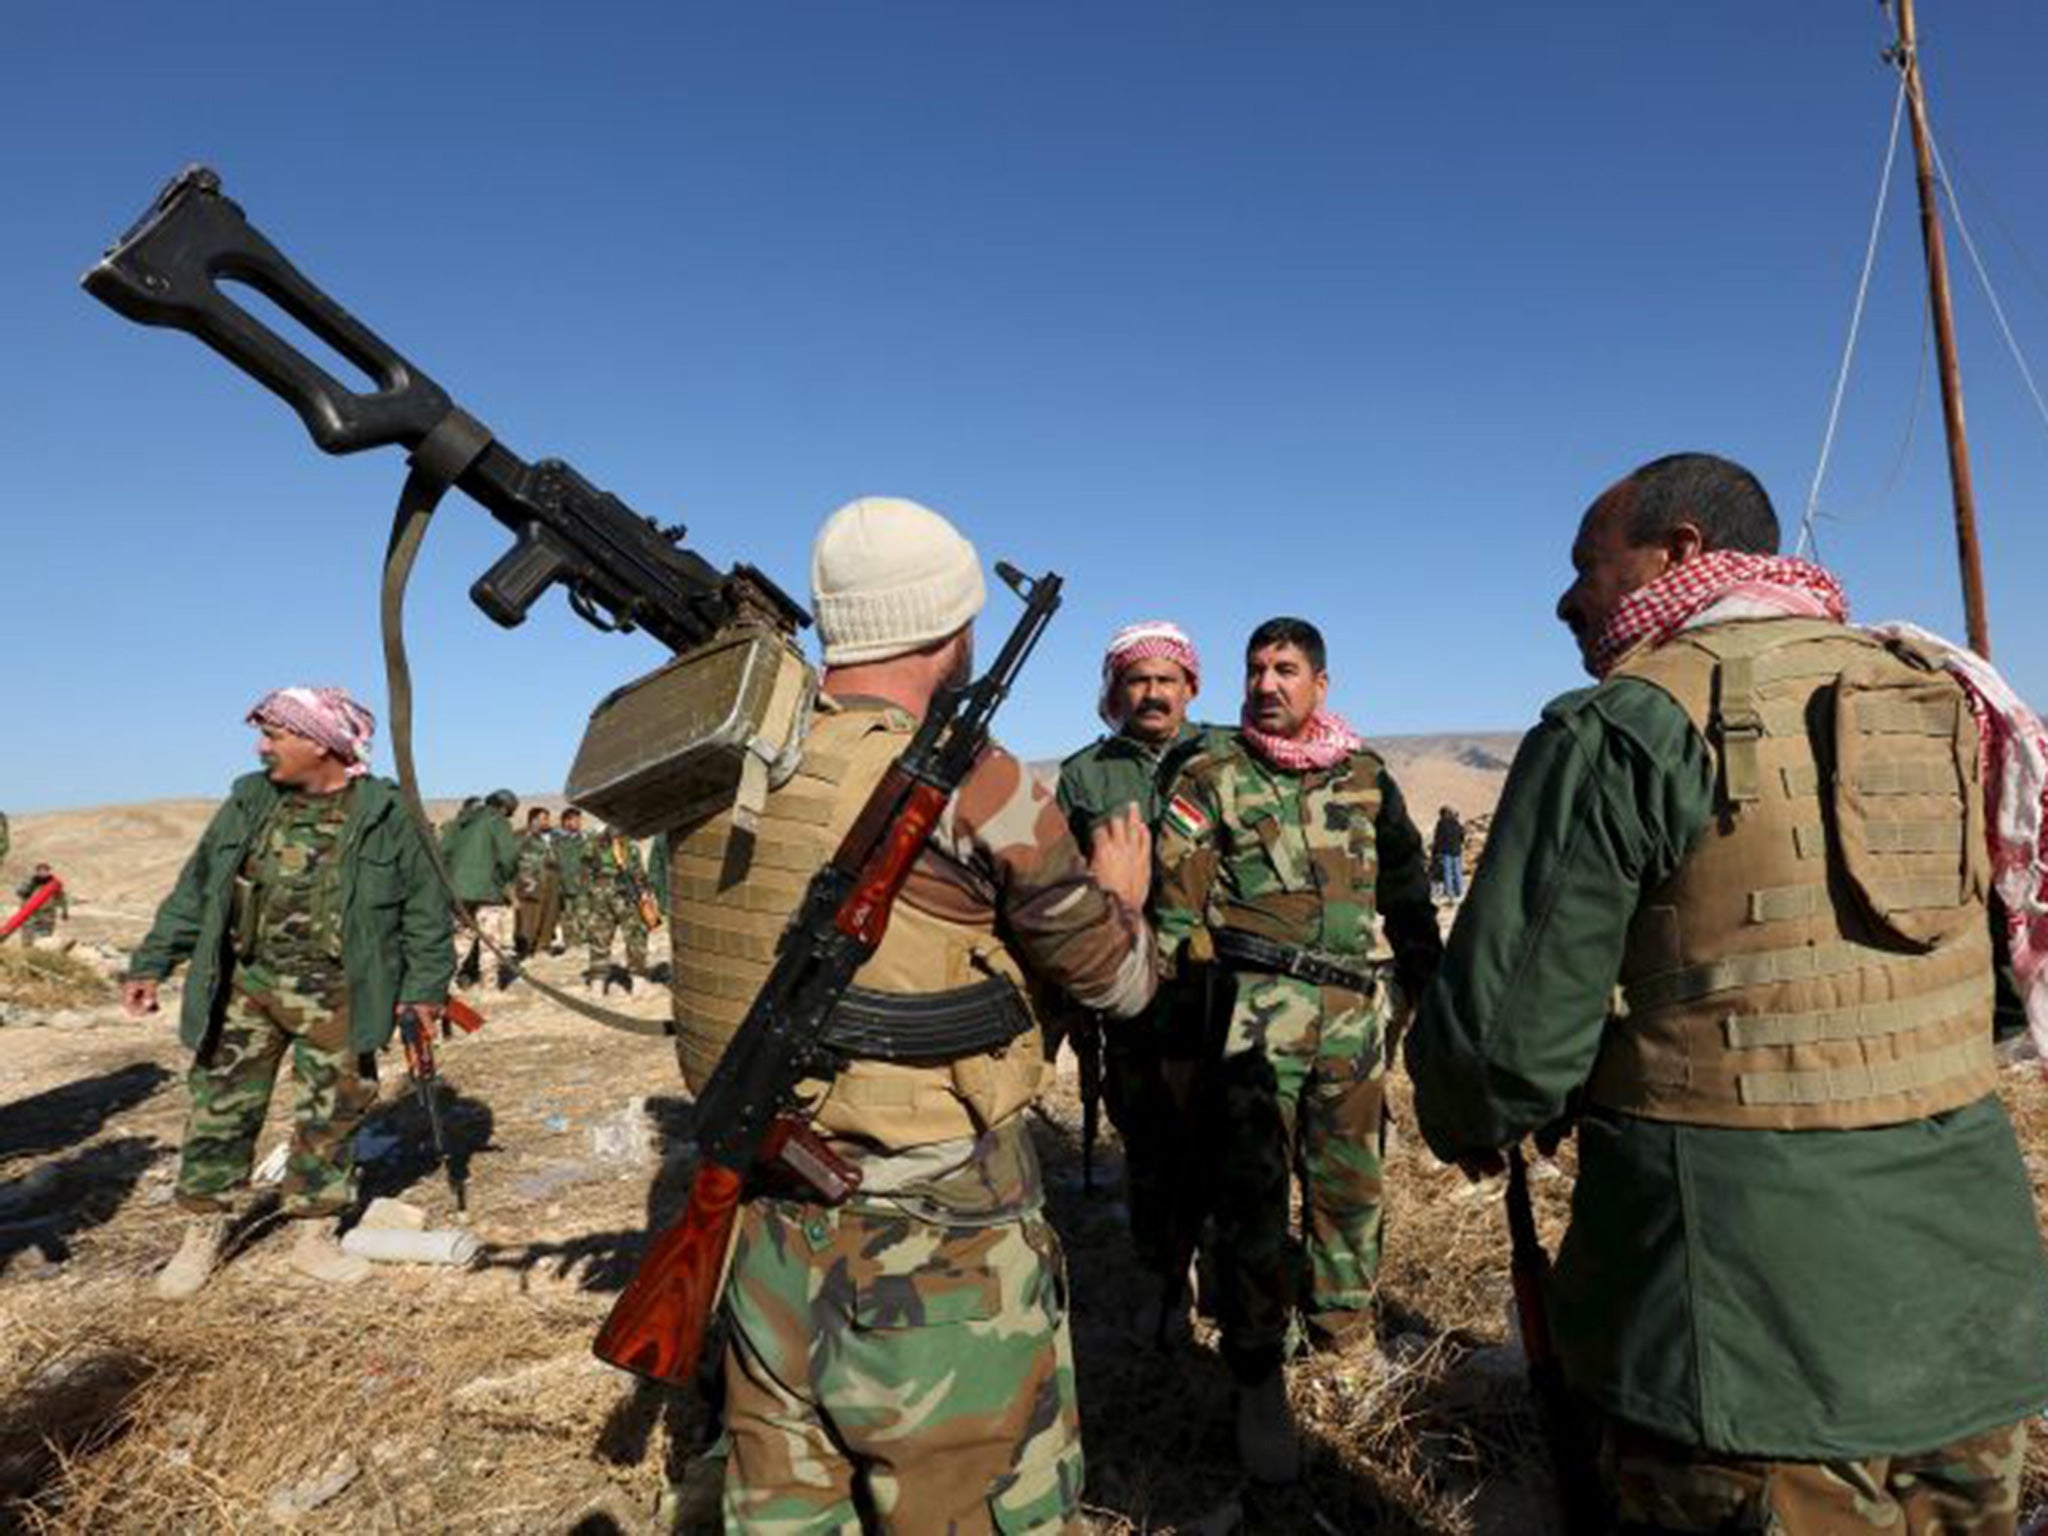 Members of the Kurdish peshmerga forces were attacked by Isis using mustard gas in August last year